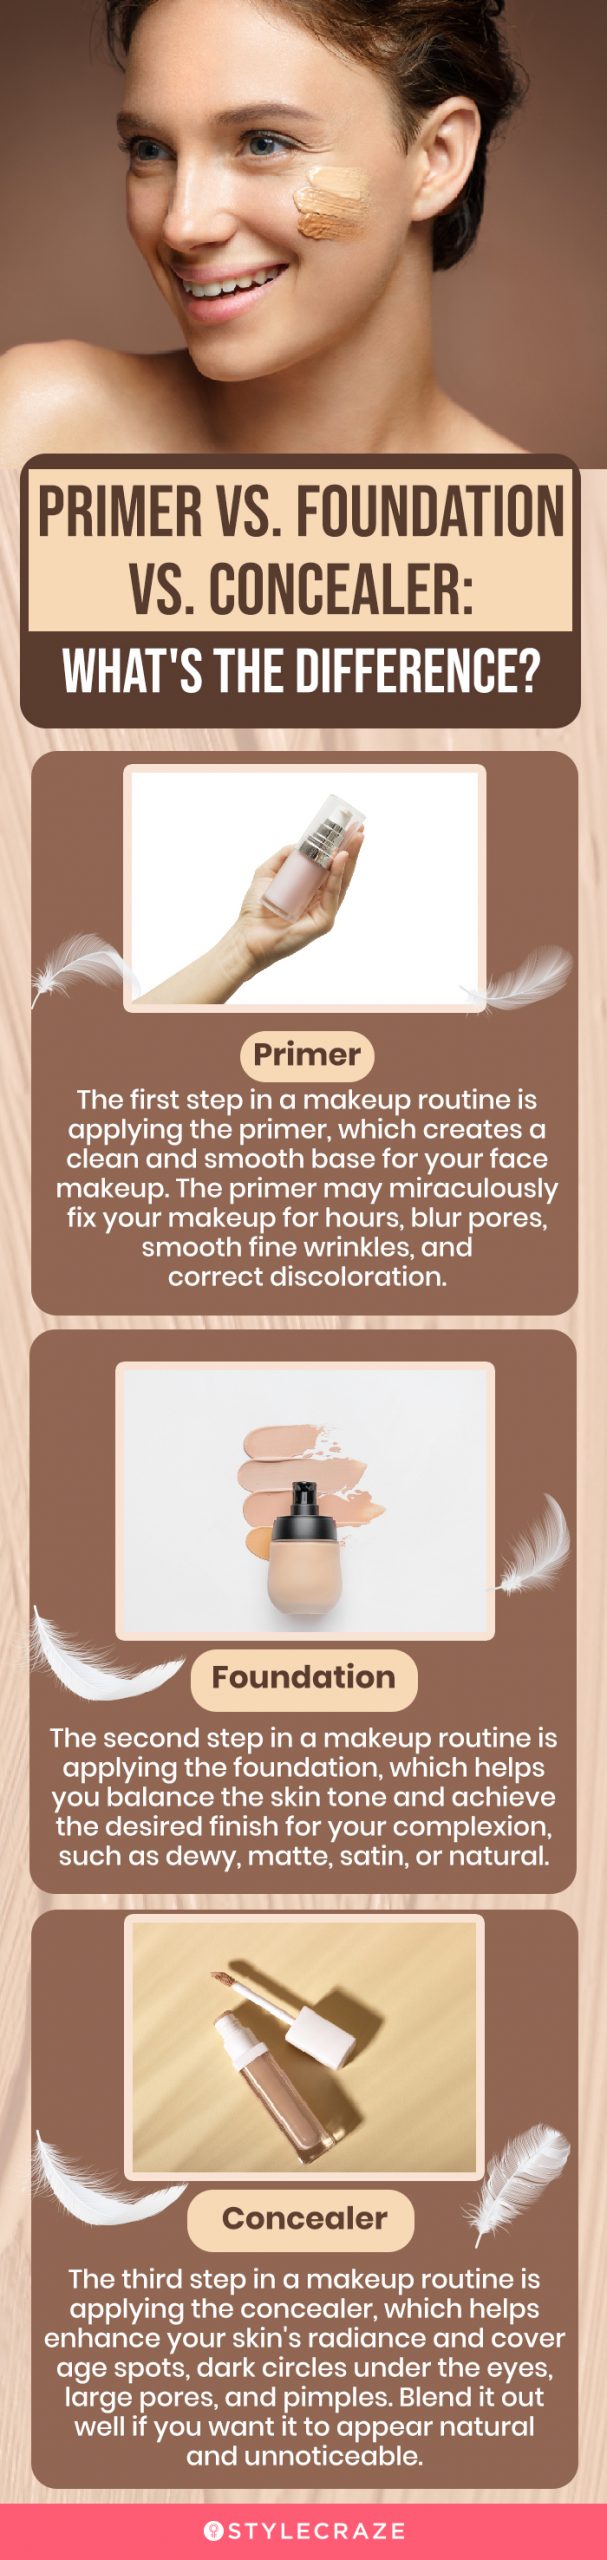 primer vs foundation vs concealer: whats the difference (infographic)